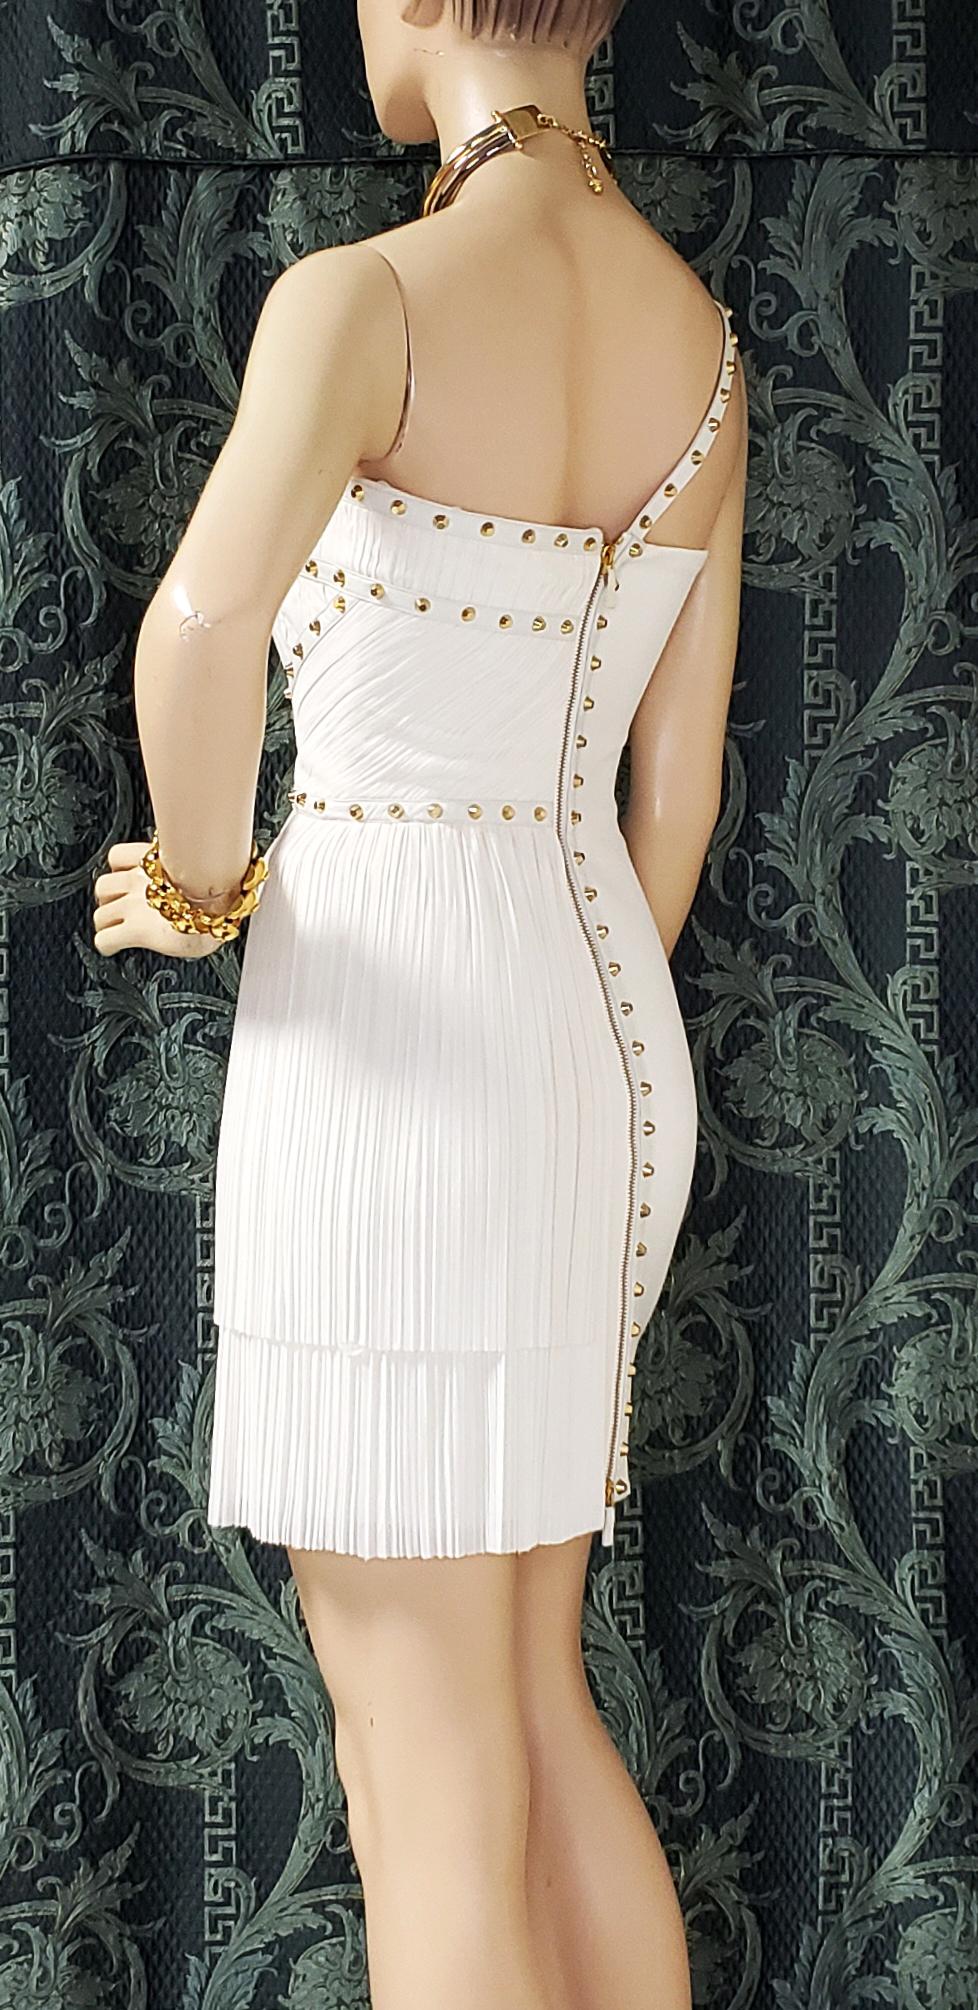 S/S 2012 look # 35 NEW VERSACE ONE SHOULDER WHITE STUDDED DRESS 38 - 2 2